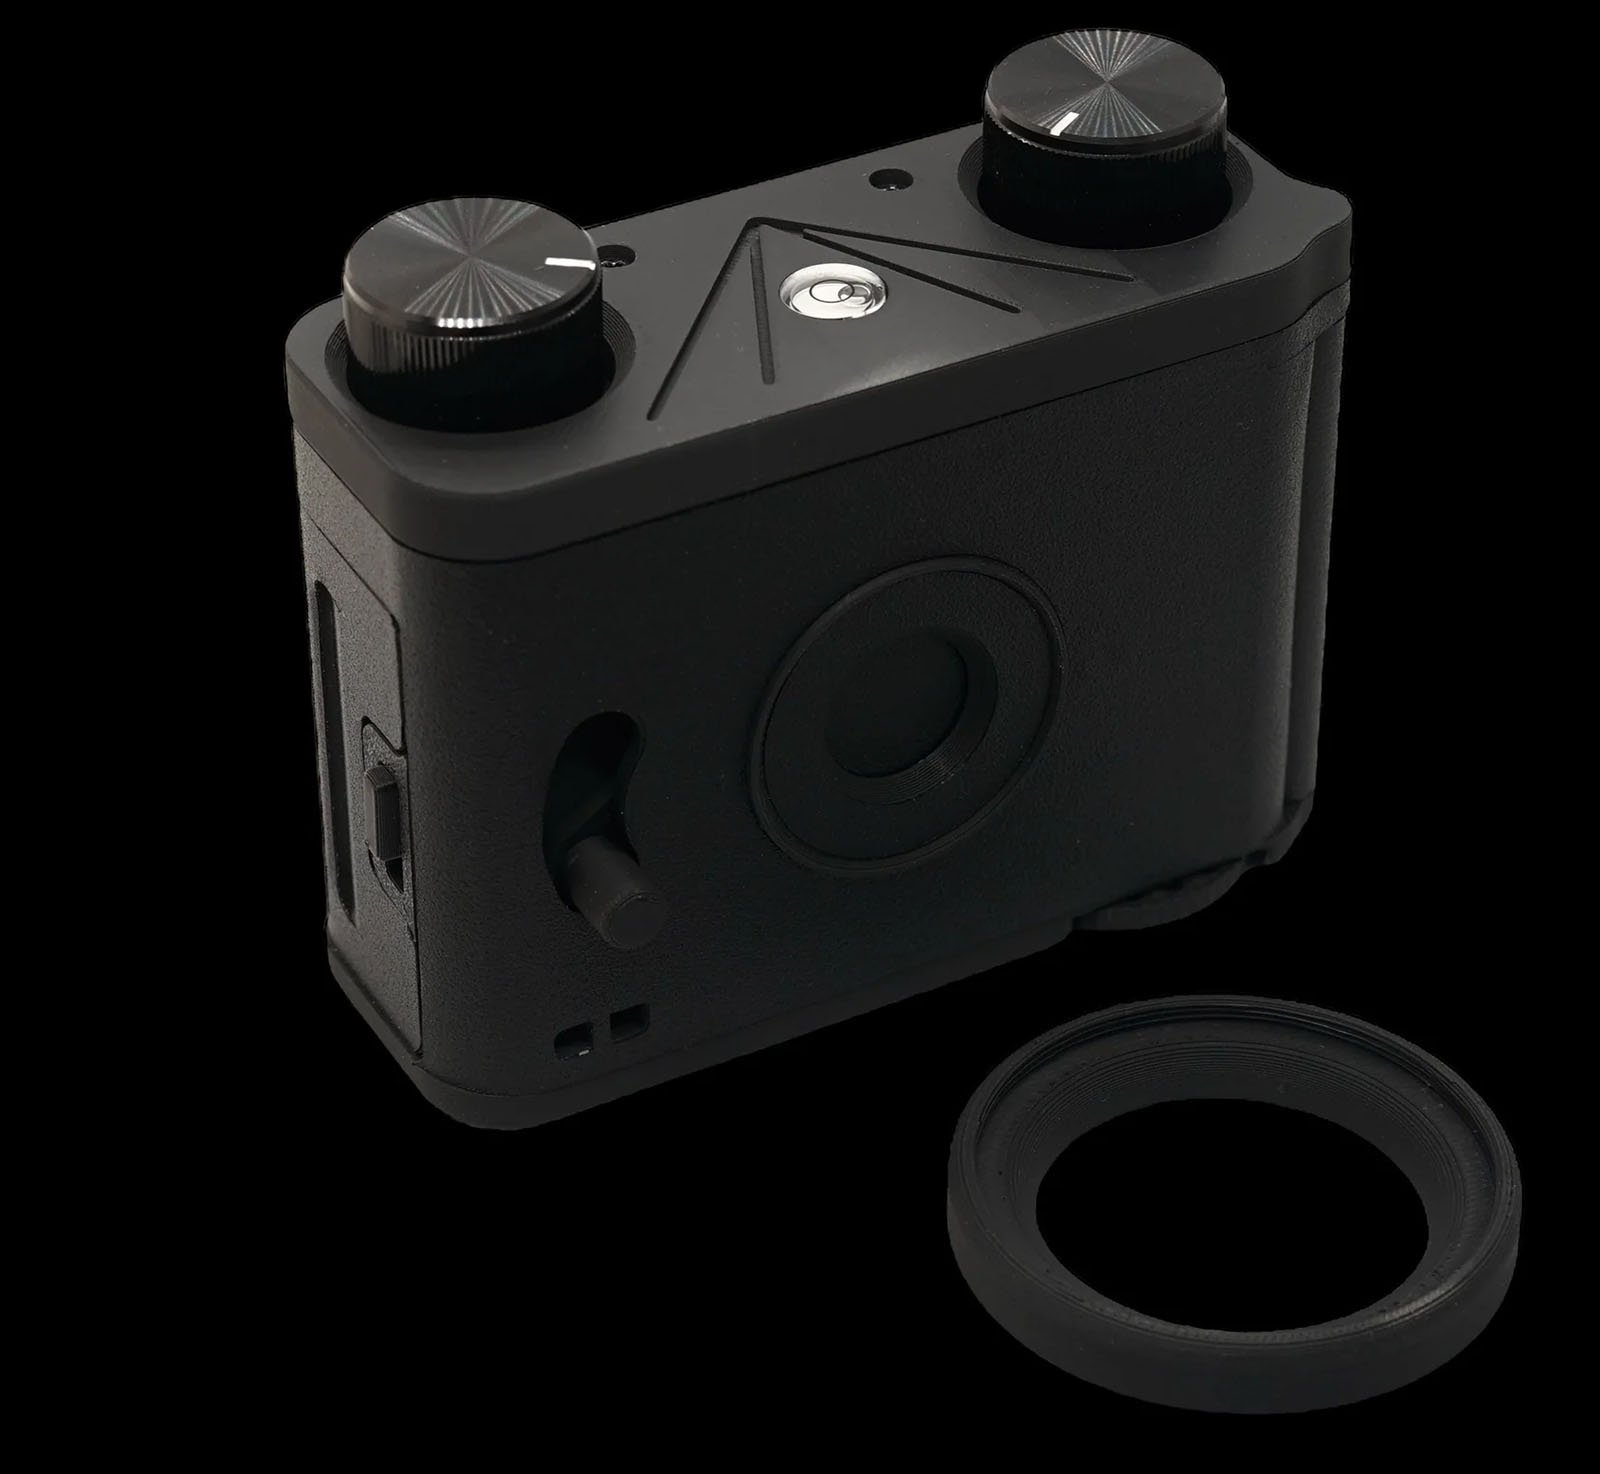 A compact black camera with two large dials on top and additional controls on the sides. It has a minimalist design with a circular element on the back. A separate lens or attachment piece lies beside it against a black background.